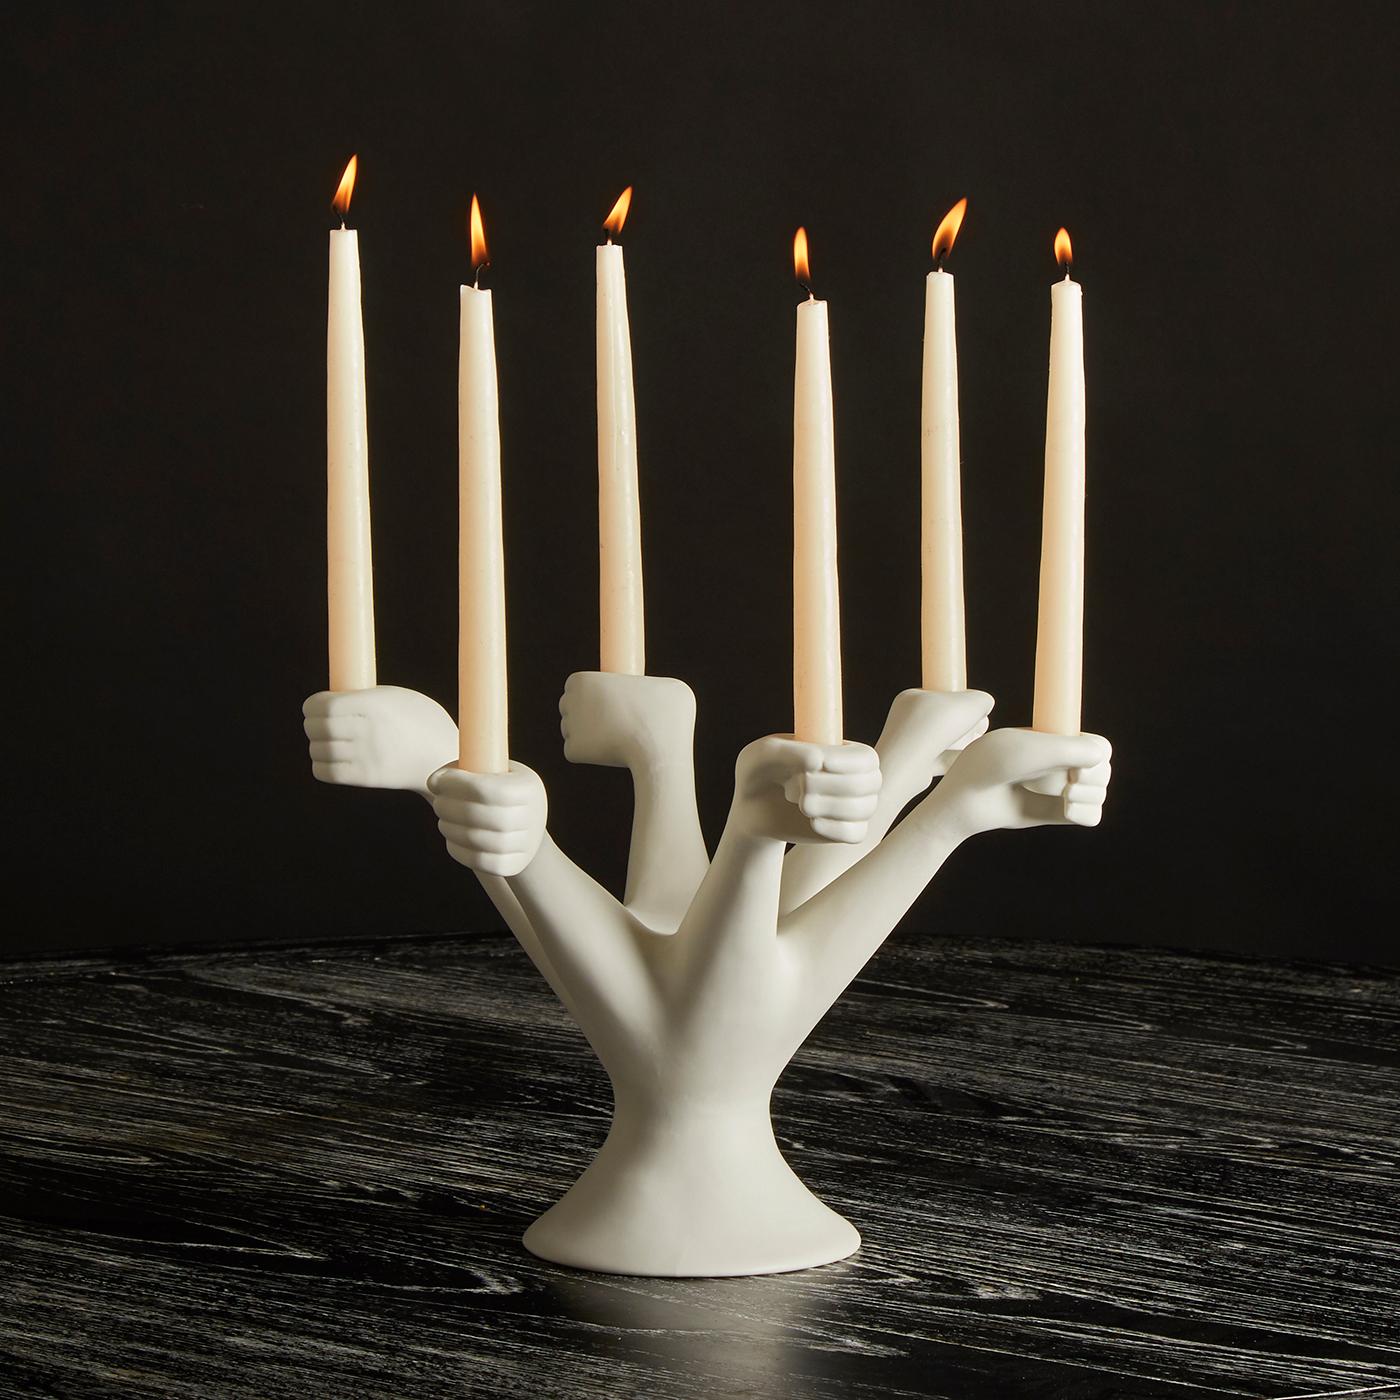 Porcelain Reverie. A heavy dose of temptation to your next dinner party —our Eve-inspired riff on the neoclassical candelabra. Crafted from high-fired porcelain, six surreal hands rise up from the base to grip taper candles. Its generous scale and